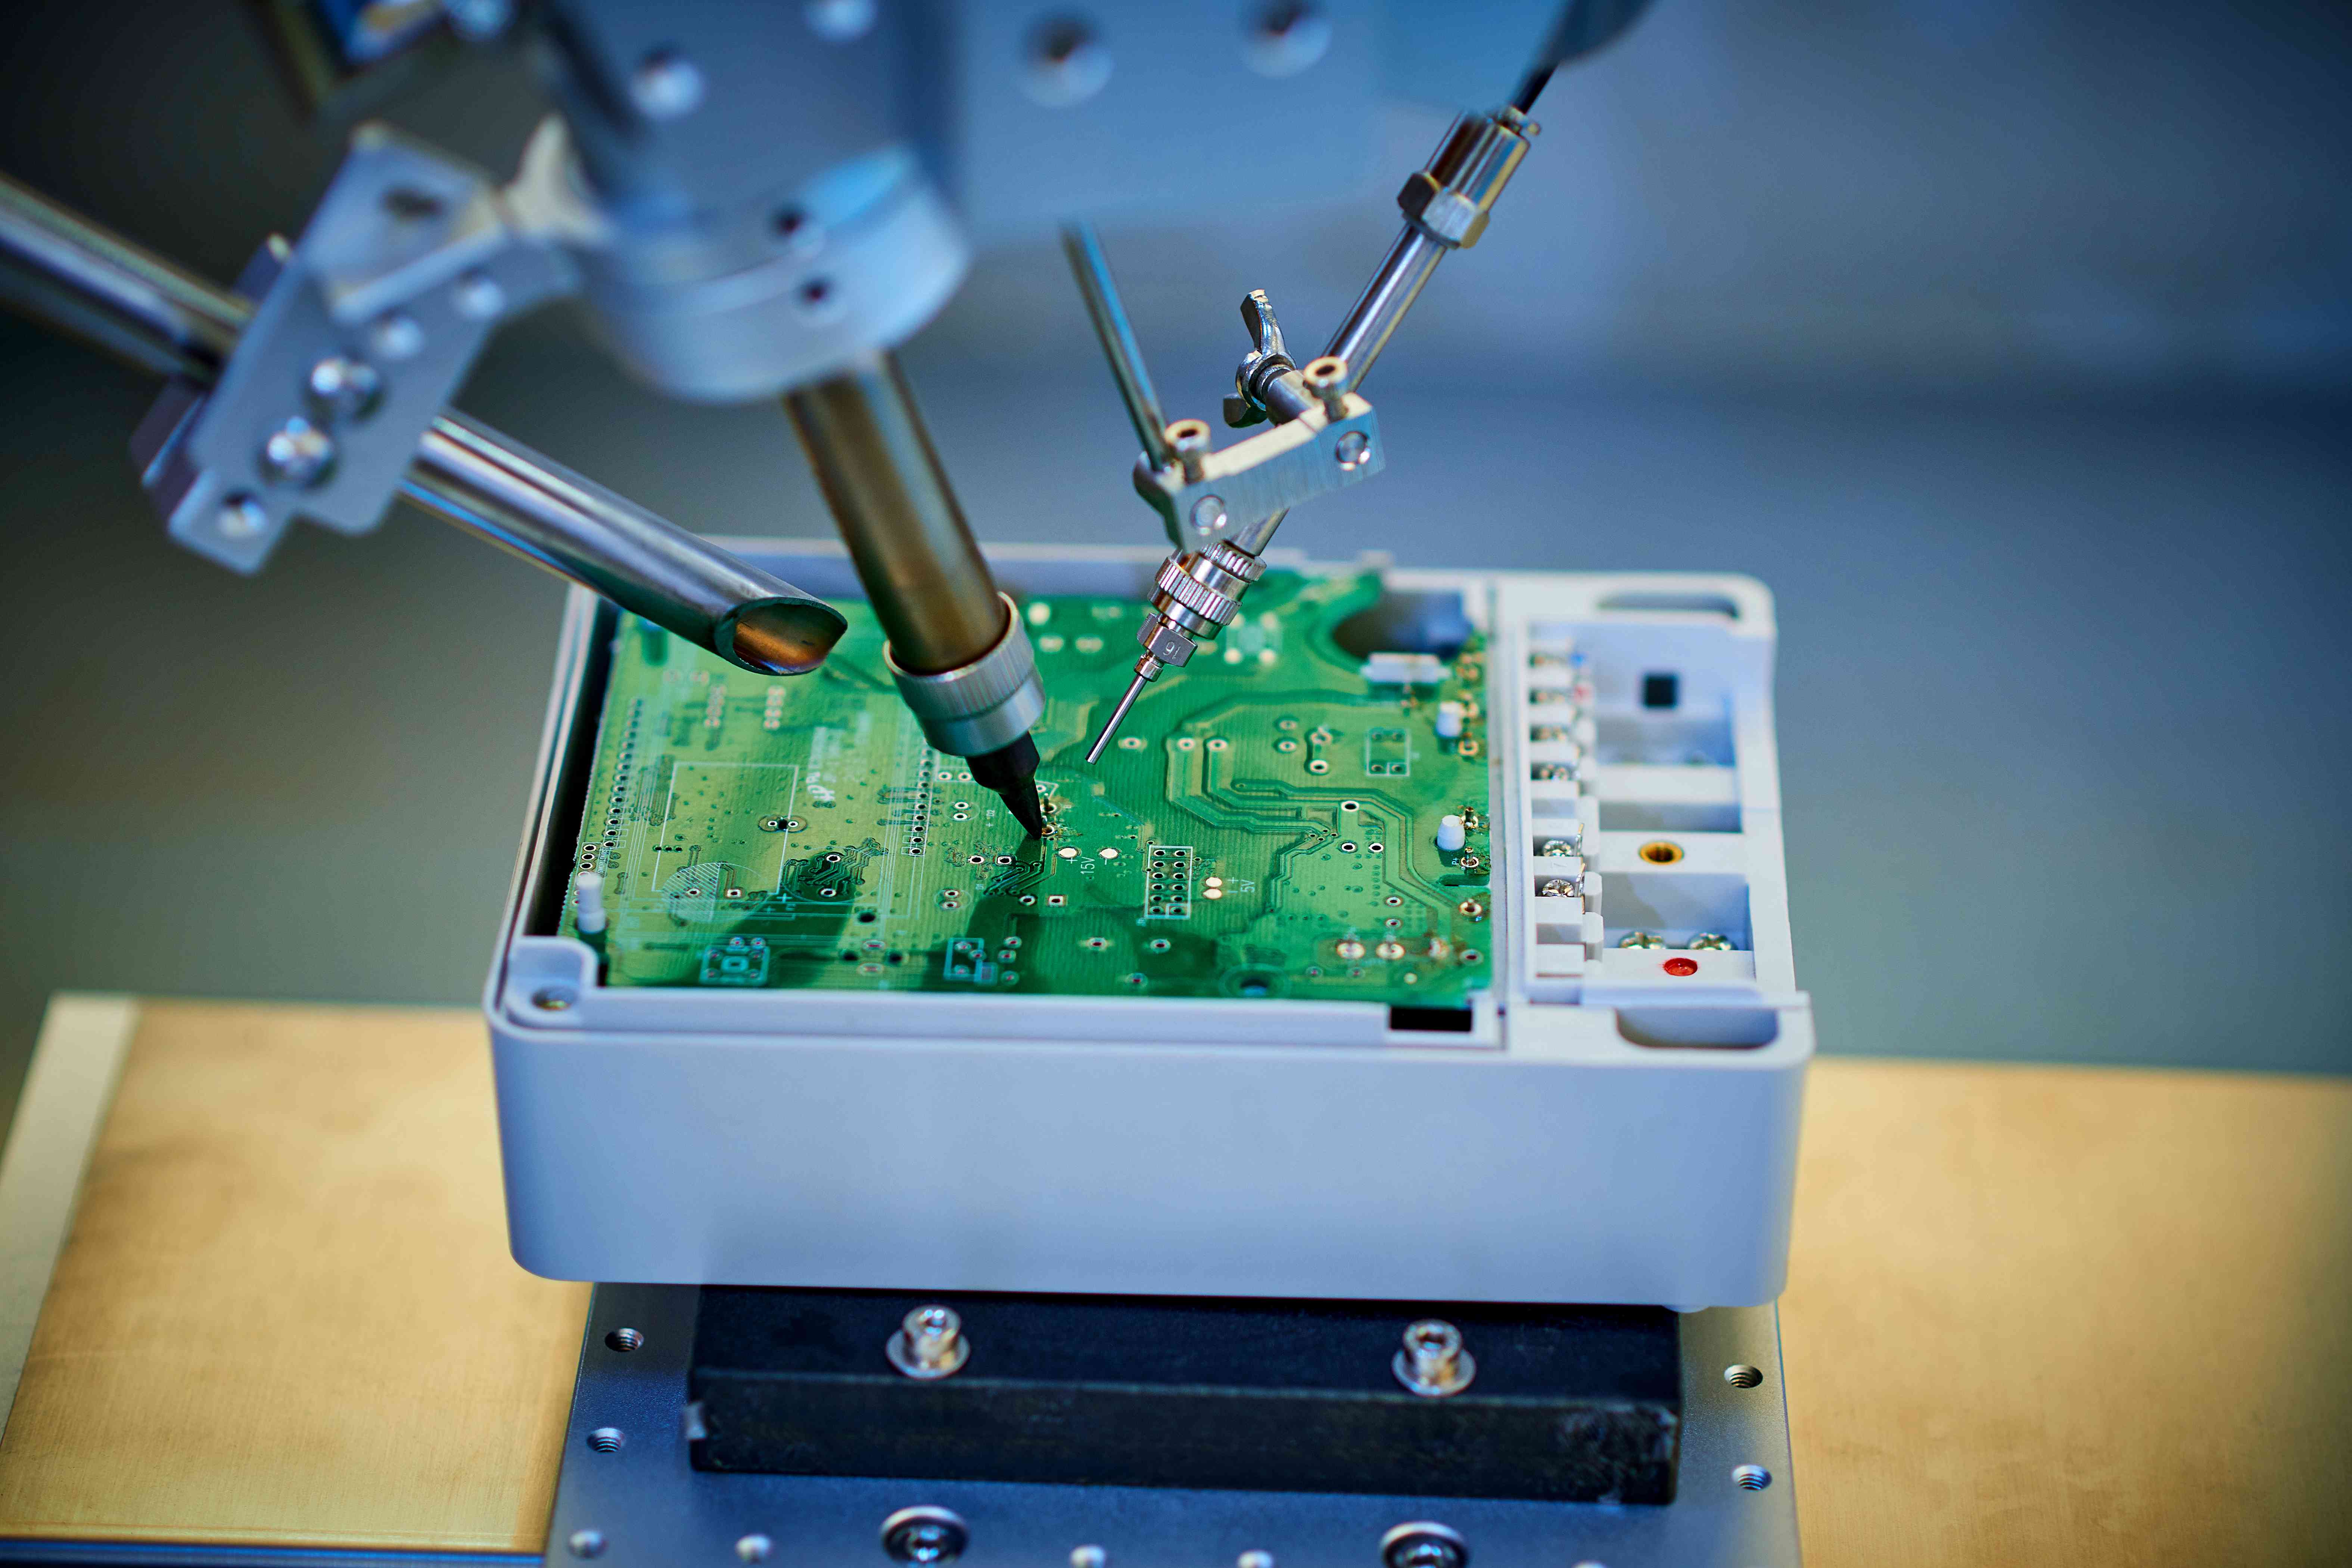 Robotic arm welding and installing component onto semiconductor circuit board on workbench